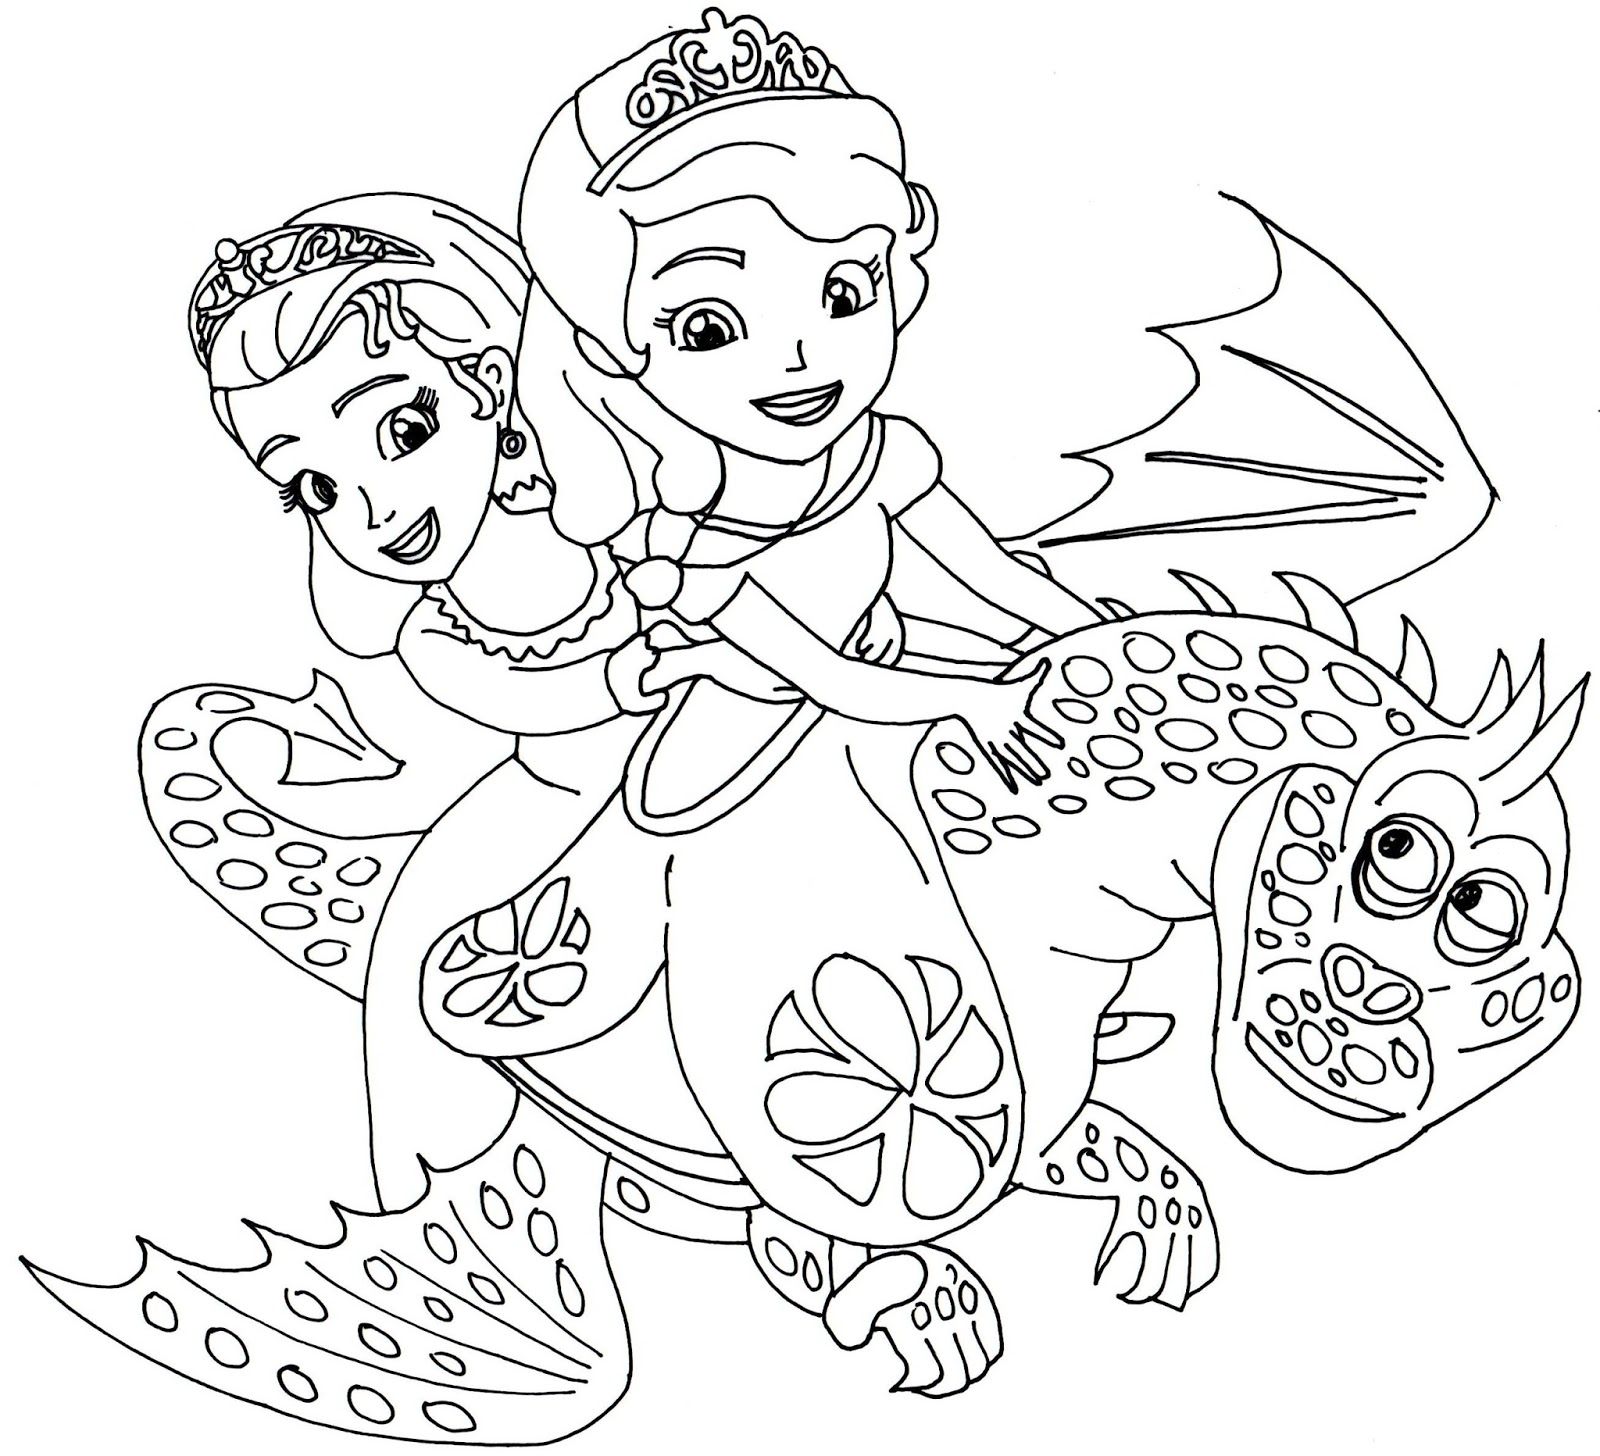 Free Sofia The First Printable Coloring Pages, Download Free Sofia The